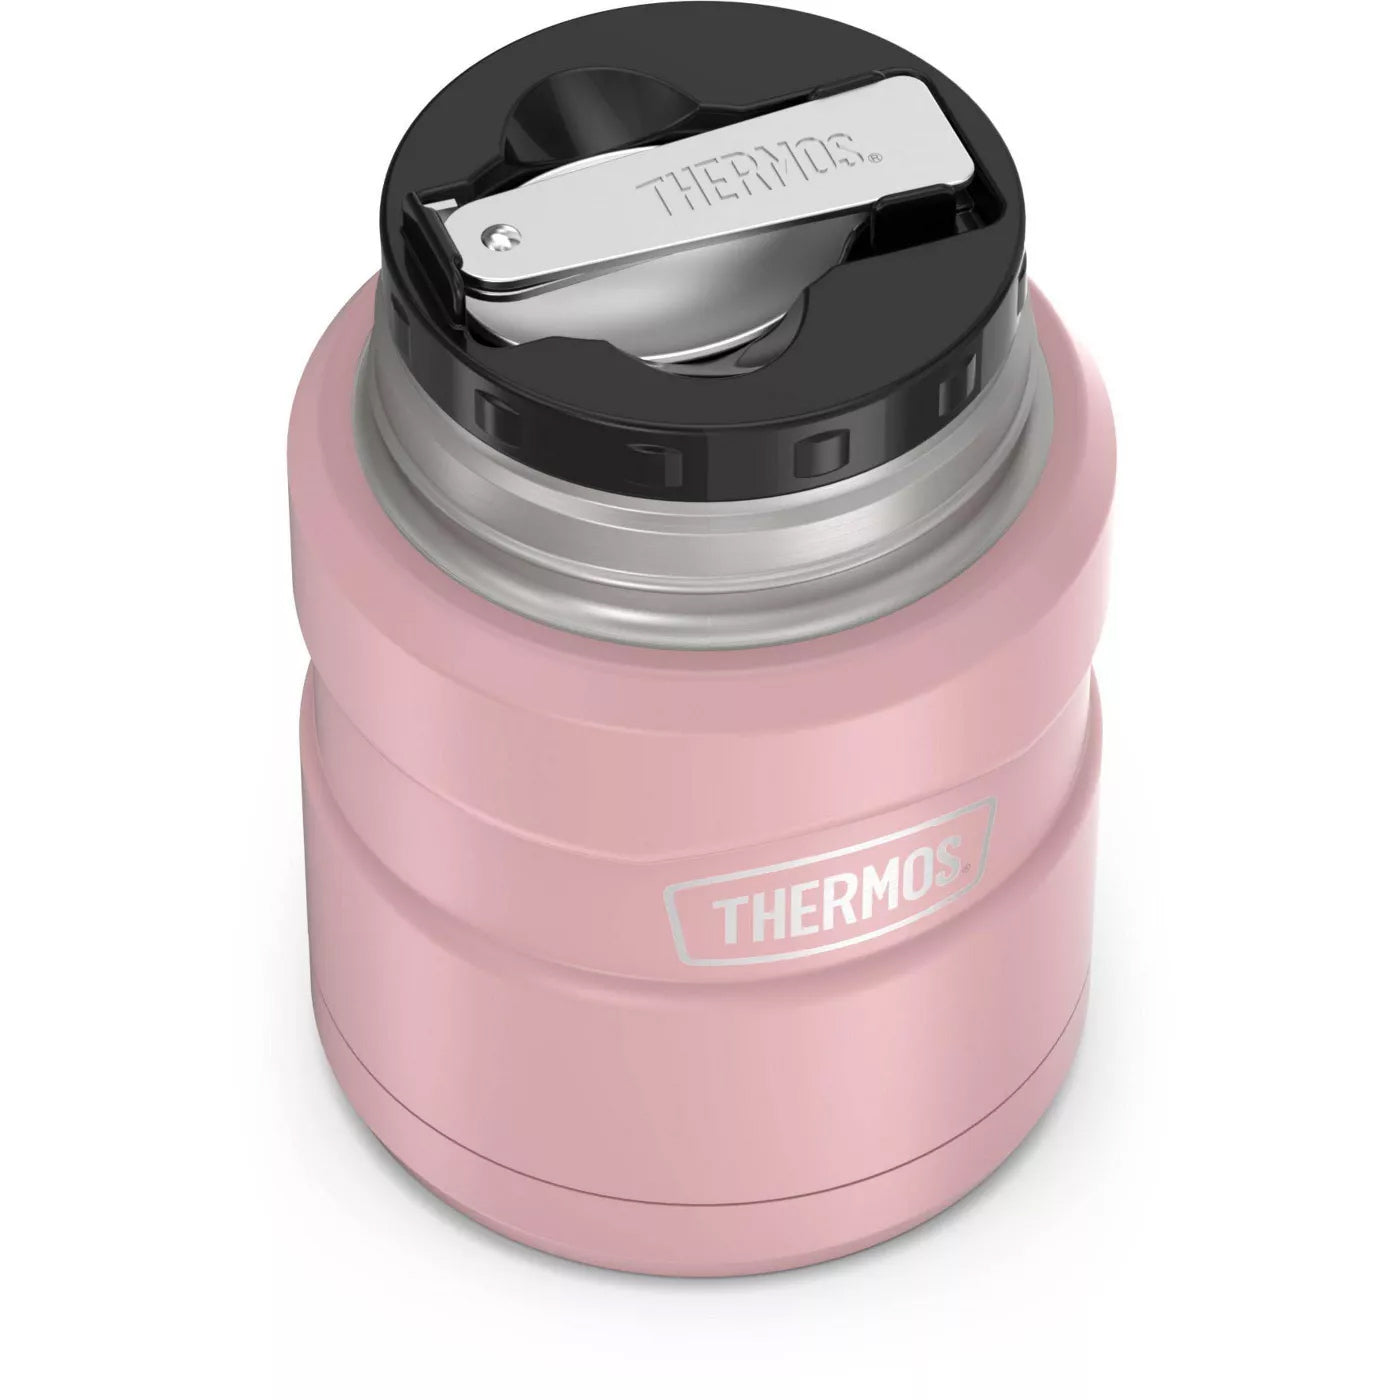 Thermos Stainless King Vacuum Insulated Food Jar 470mL - Matte